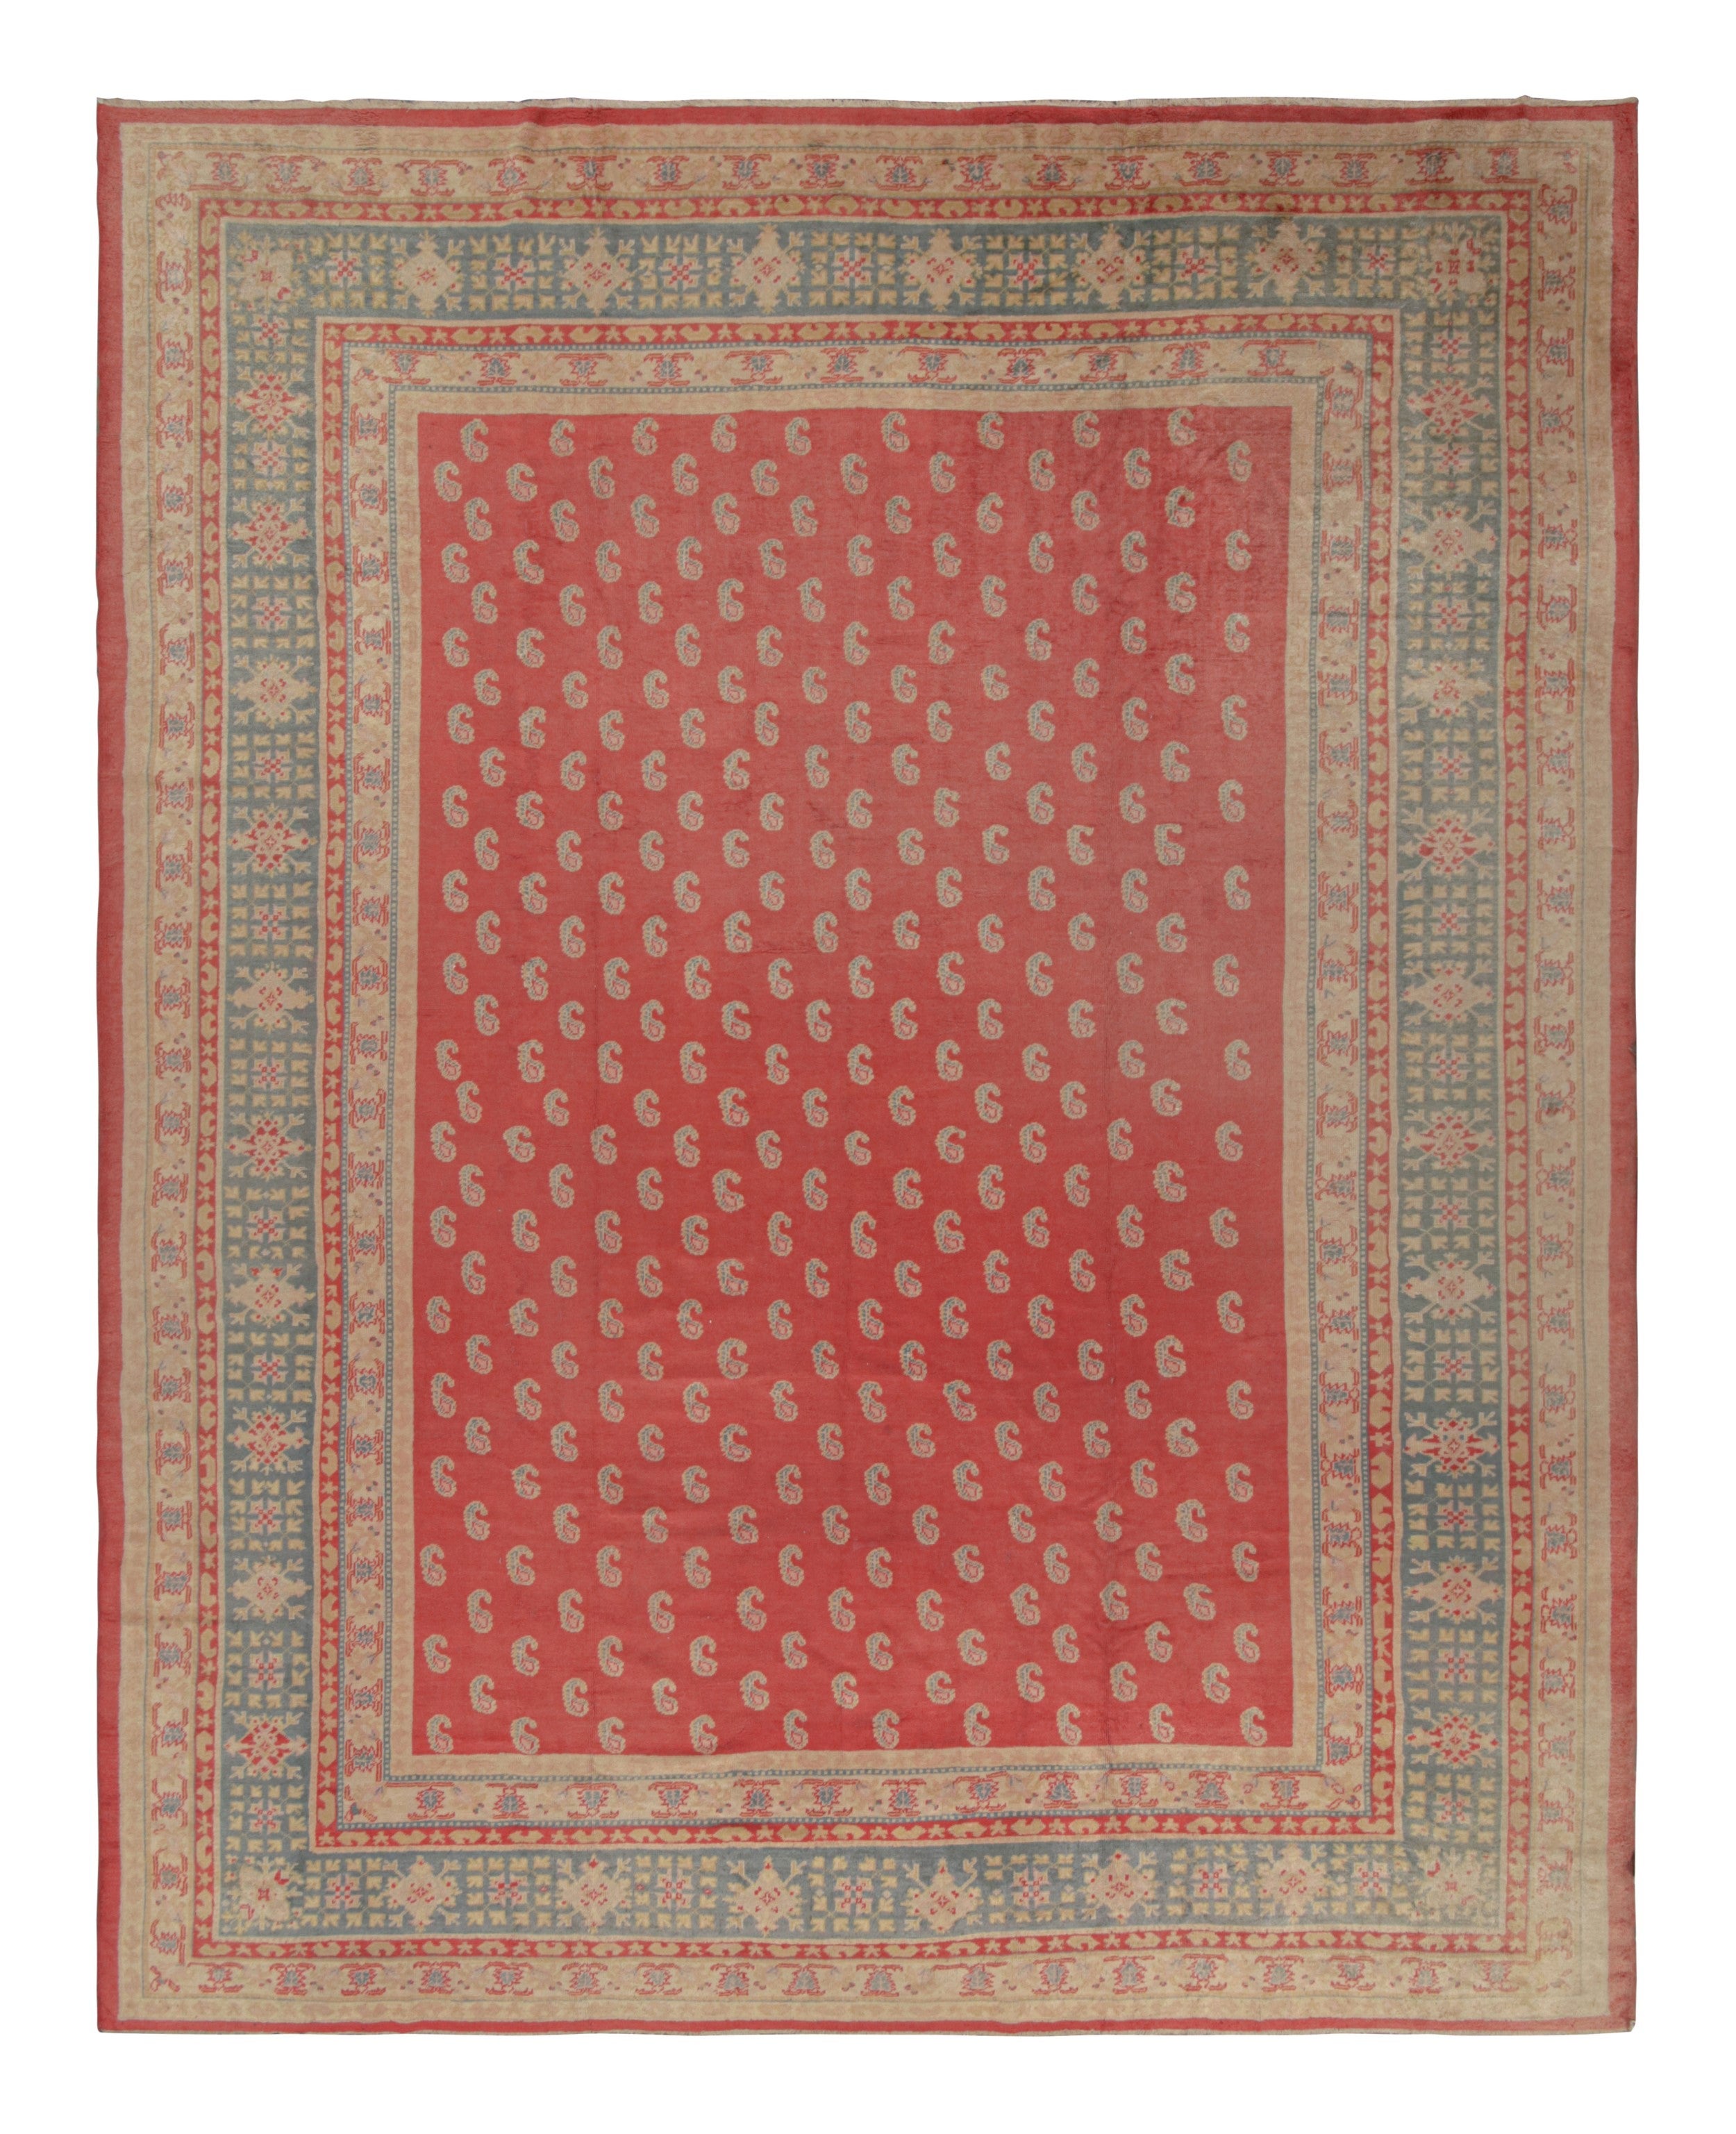 Antique Oushak Rug in Red with Paisley Patterns, from Rug & Kilim For Sale